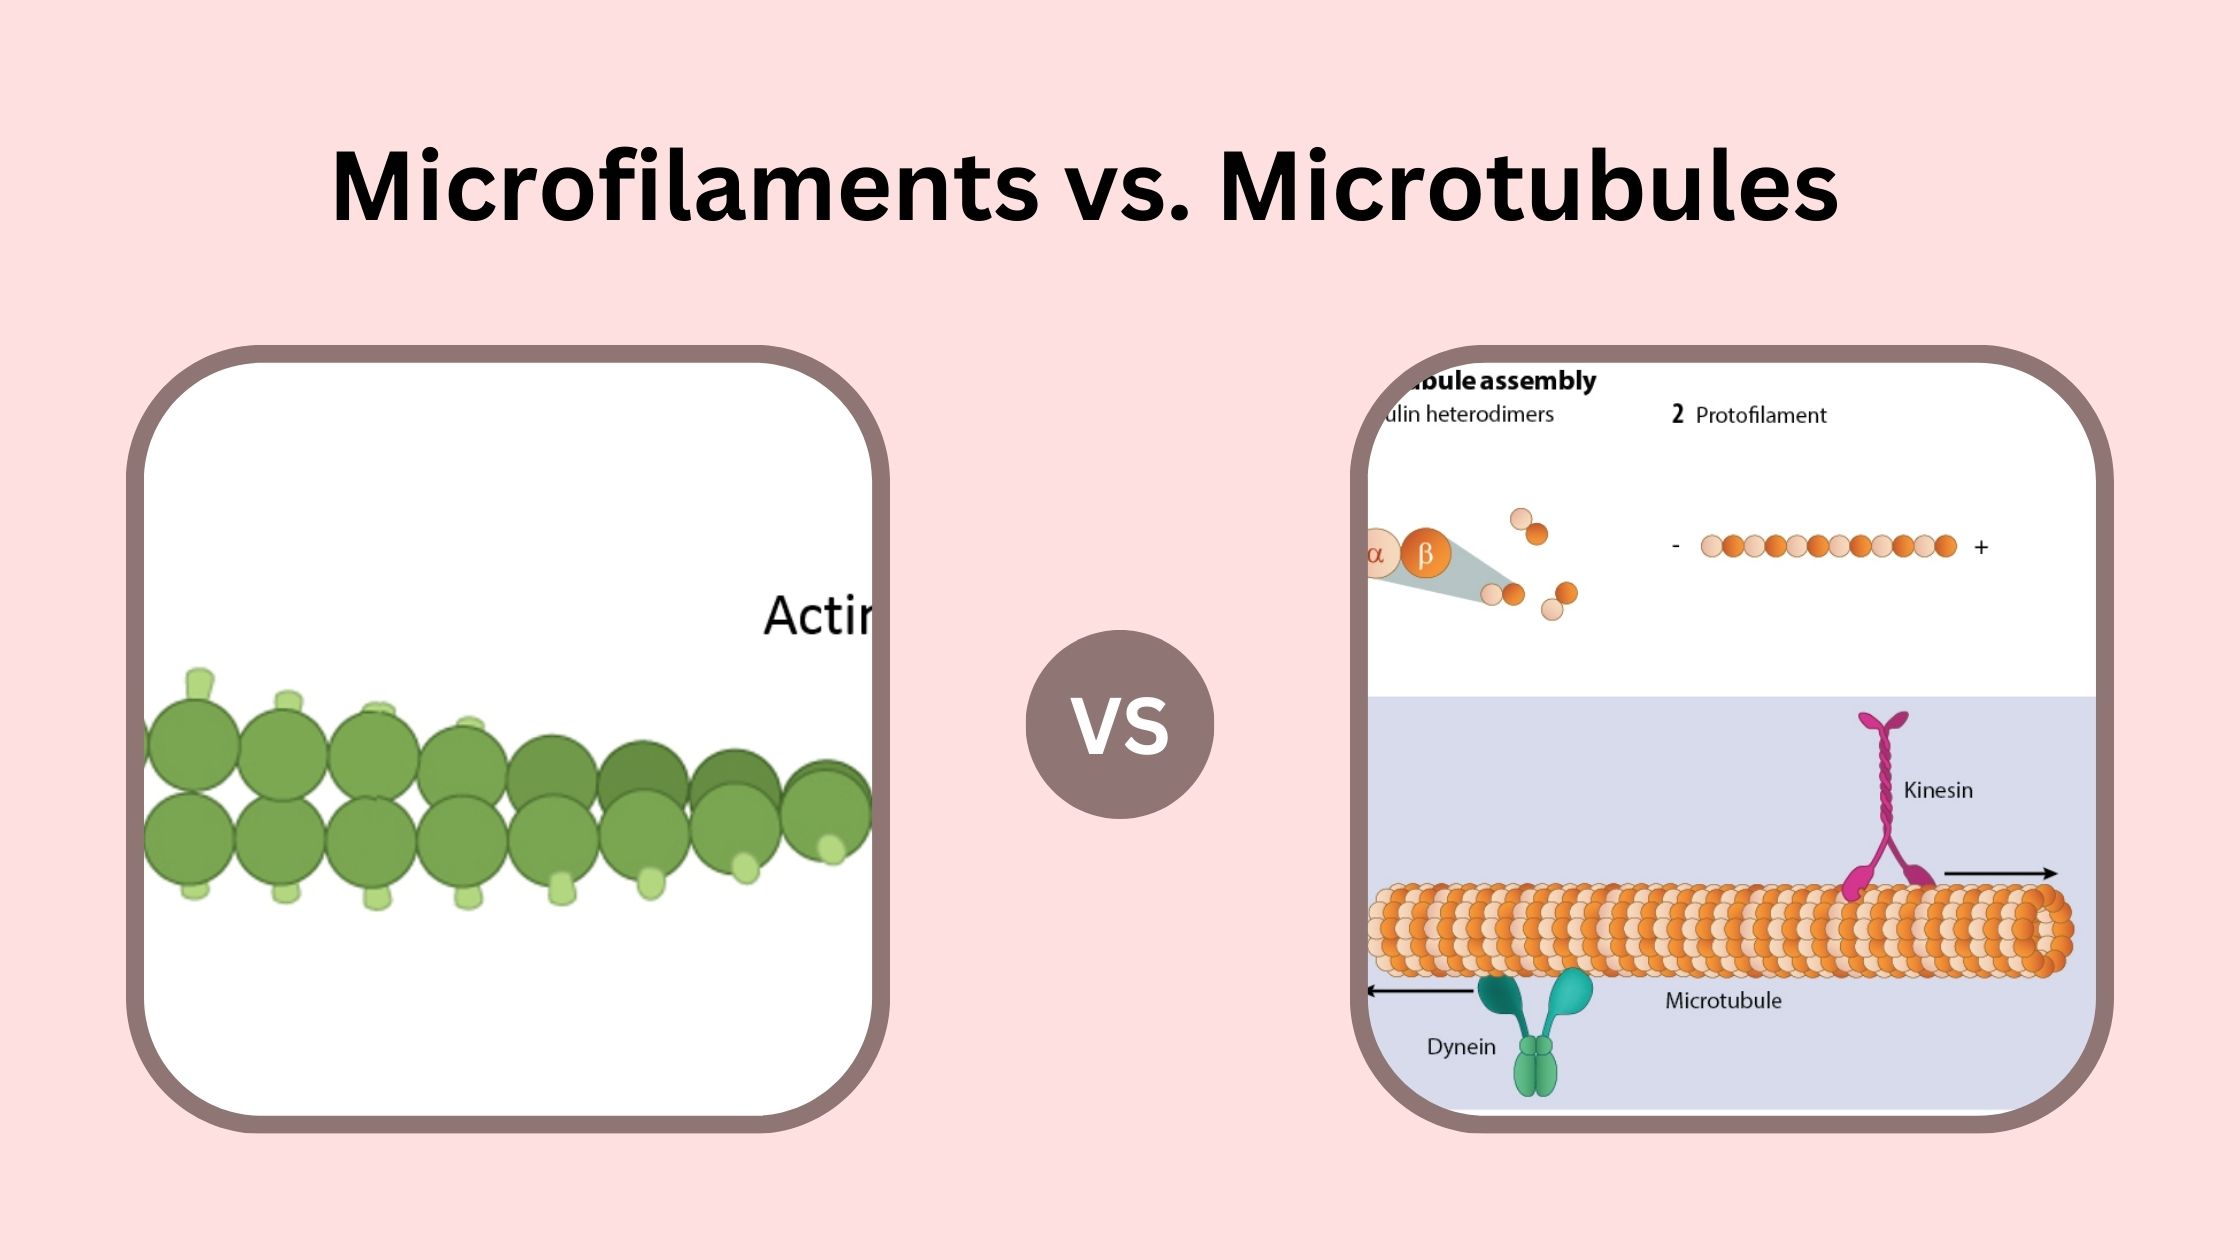 Differences Between Microfilaments and Microtubules - Microfilaments vs. Microtubules